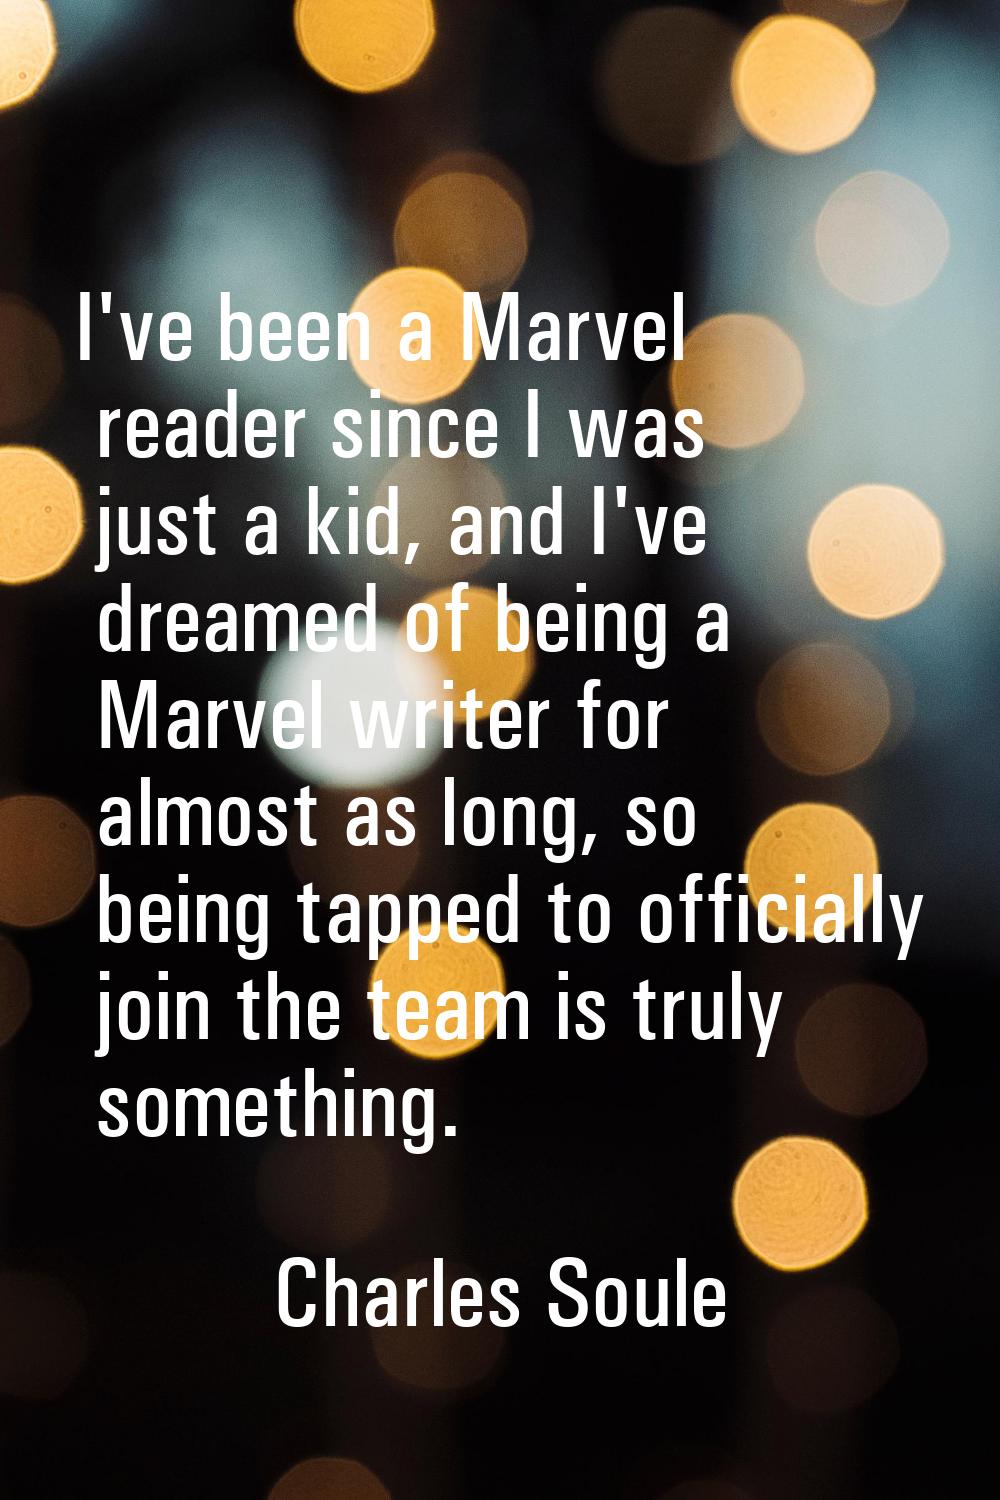 I've been a Marvel reader since I was just a kid, and I've dreamed of being a Marvel writer for alm